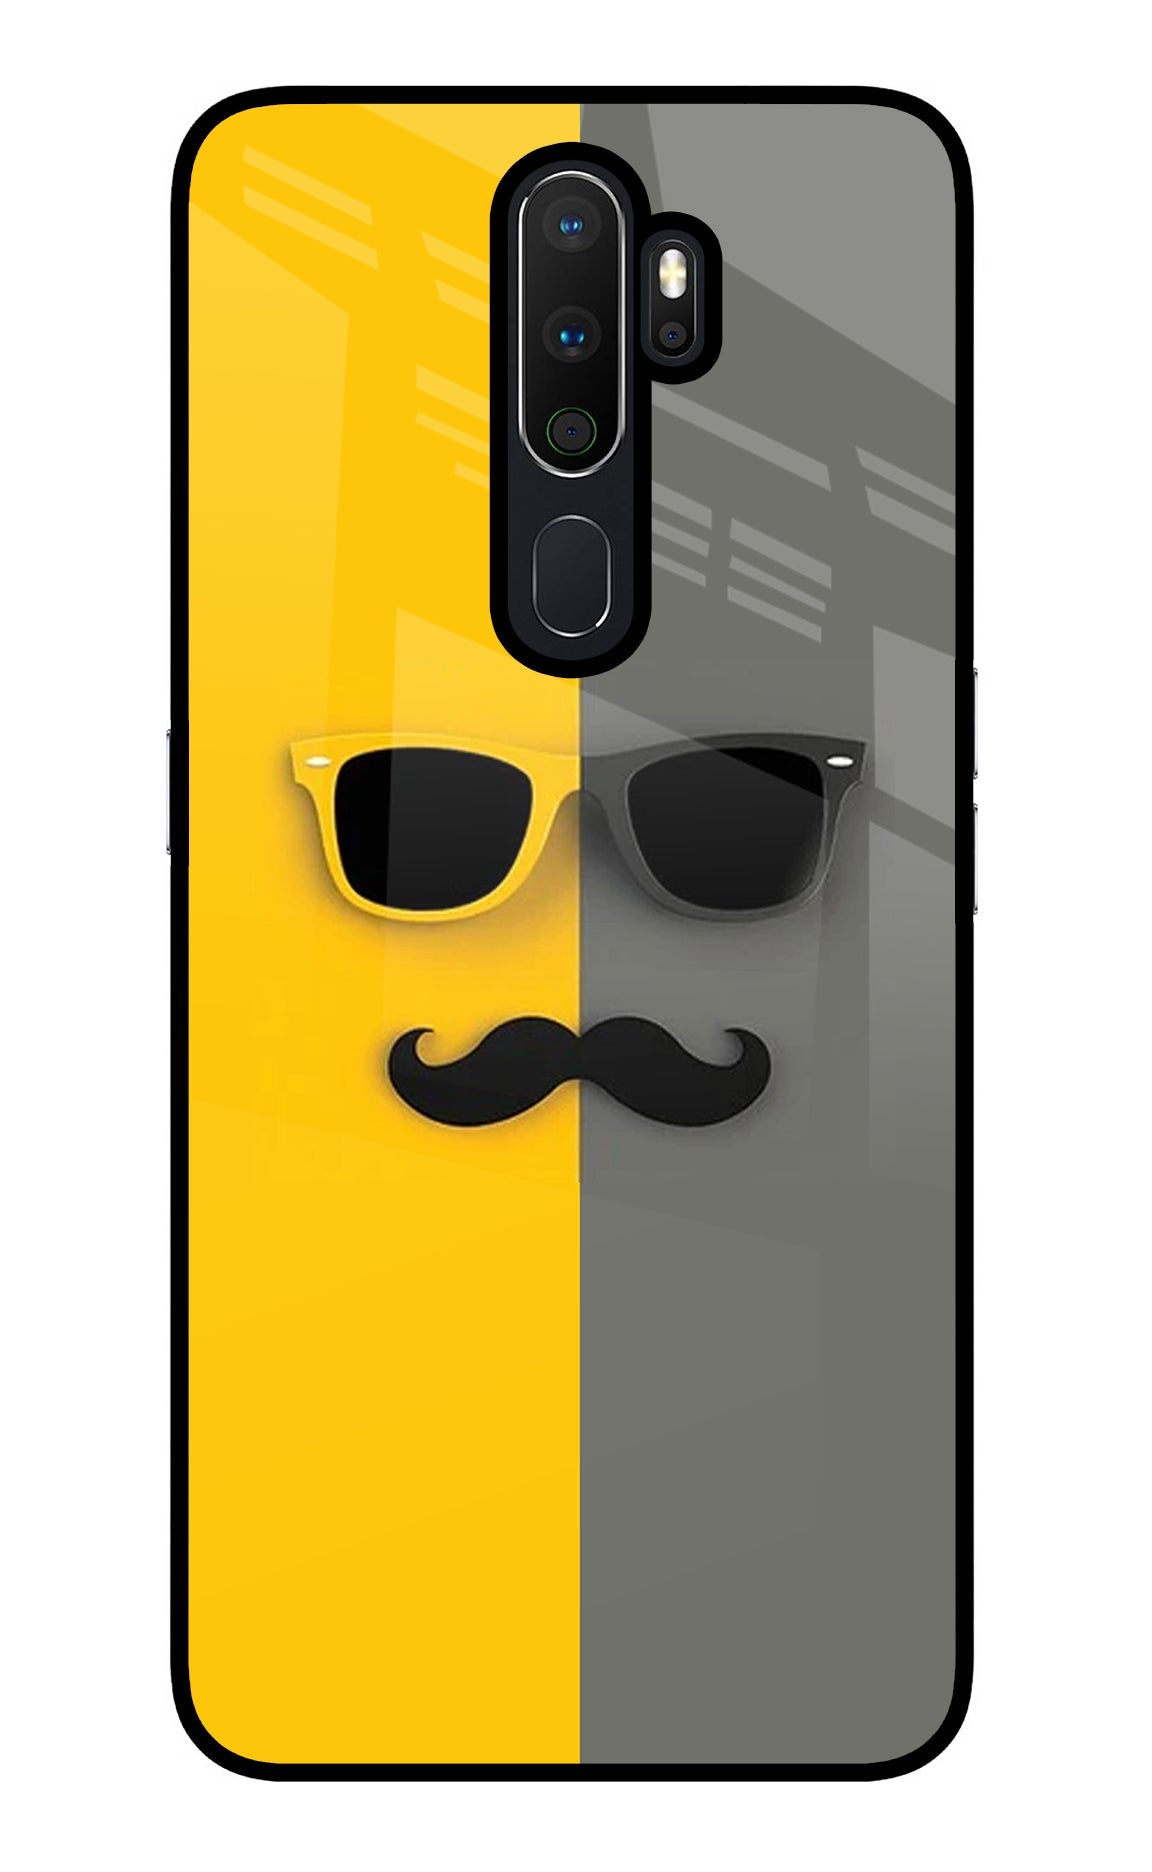 Sunglasses with Mustache Oppo A5 2020/A9 2020 Glass Case